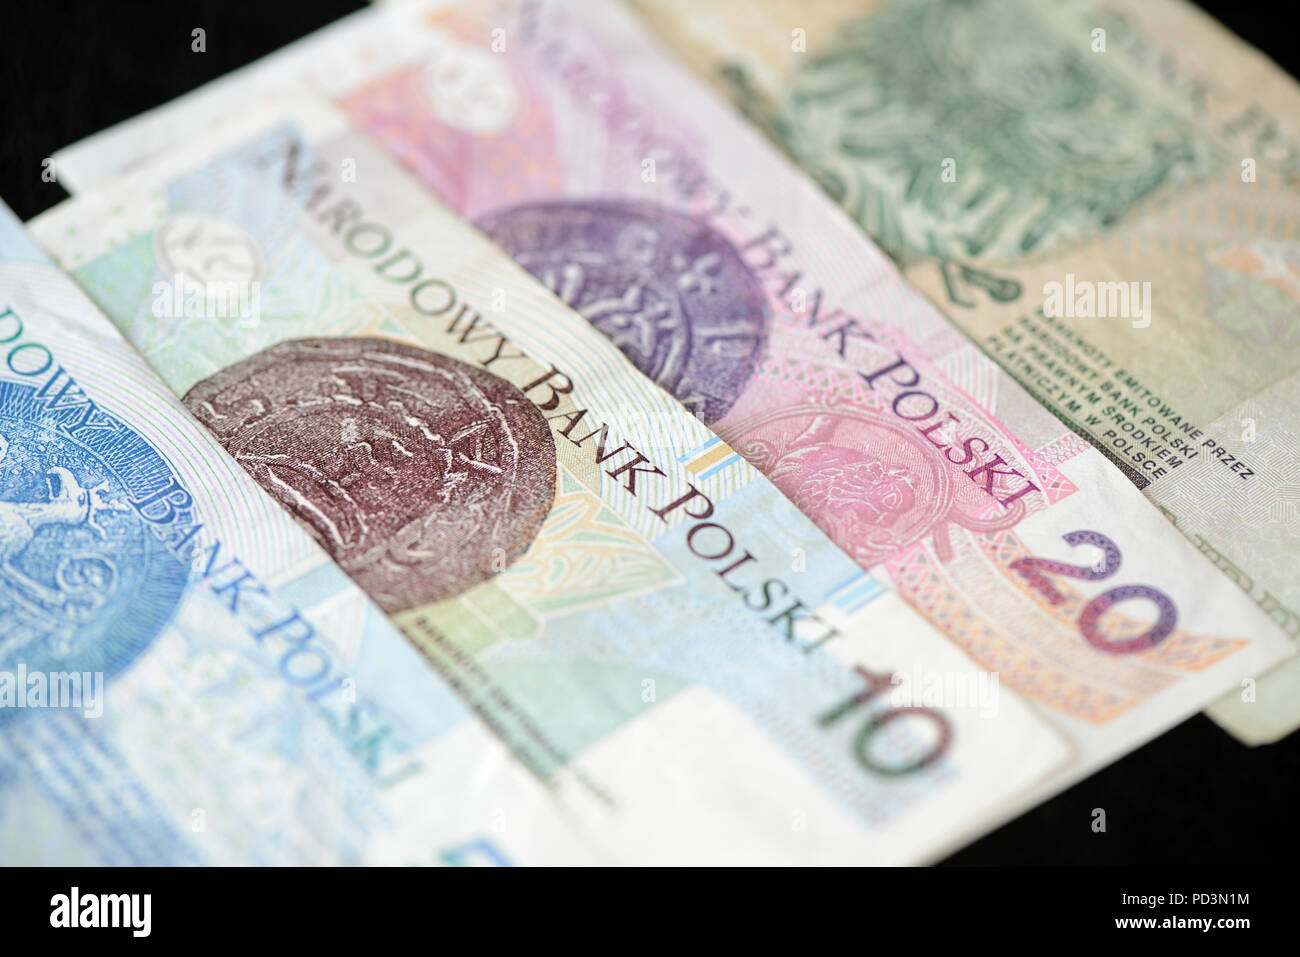 Polish Zloty High Resolution Stock Photography and Images - Alamy